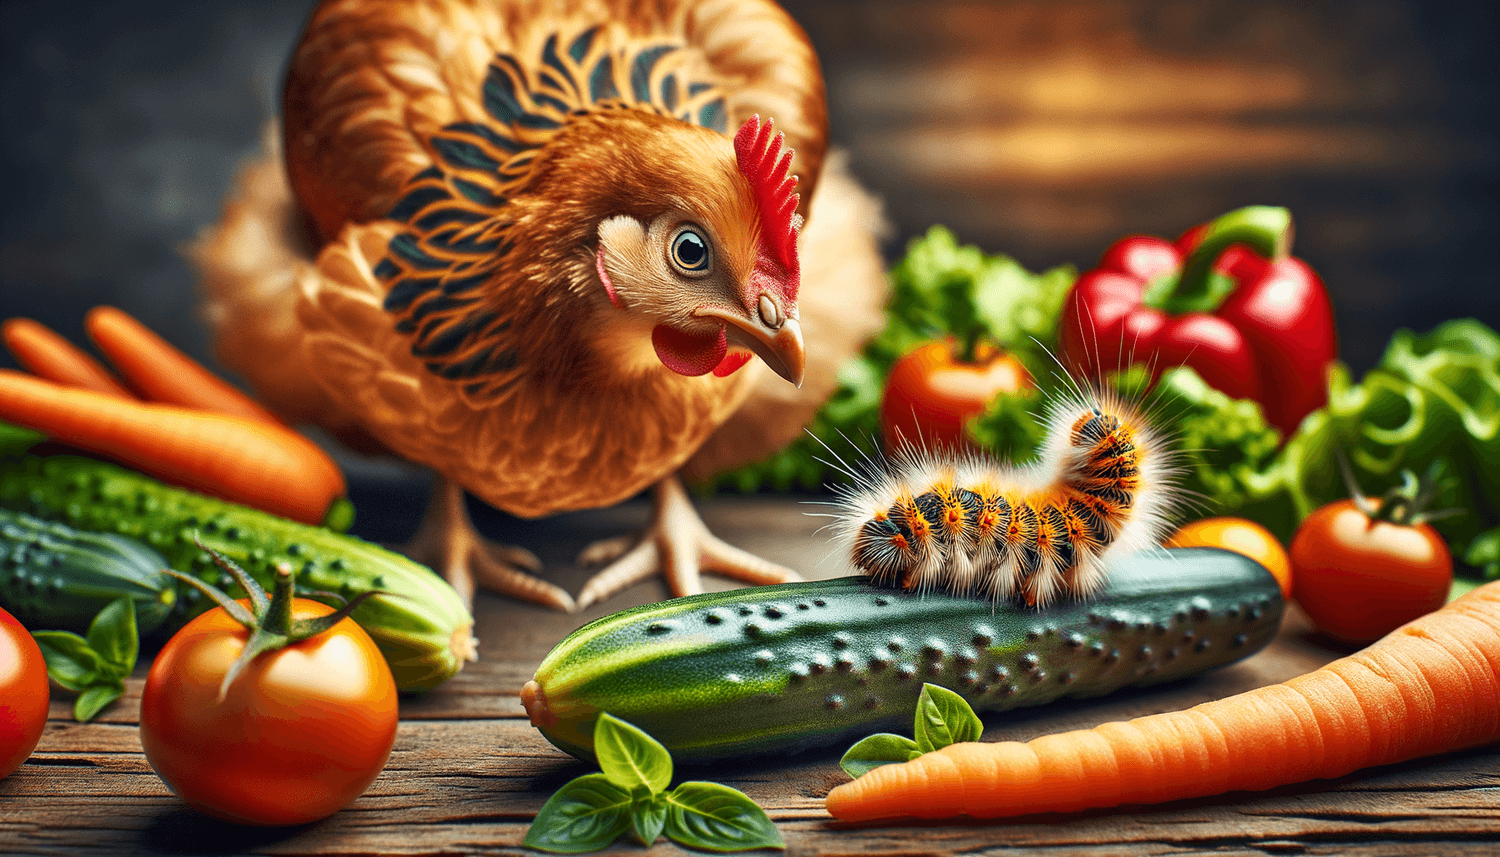 Can Chickens Eat Fuzzy Caterpillars?